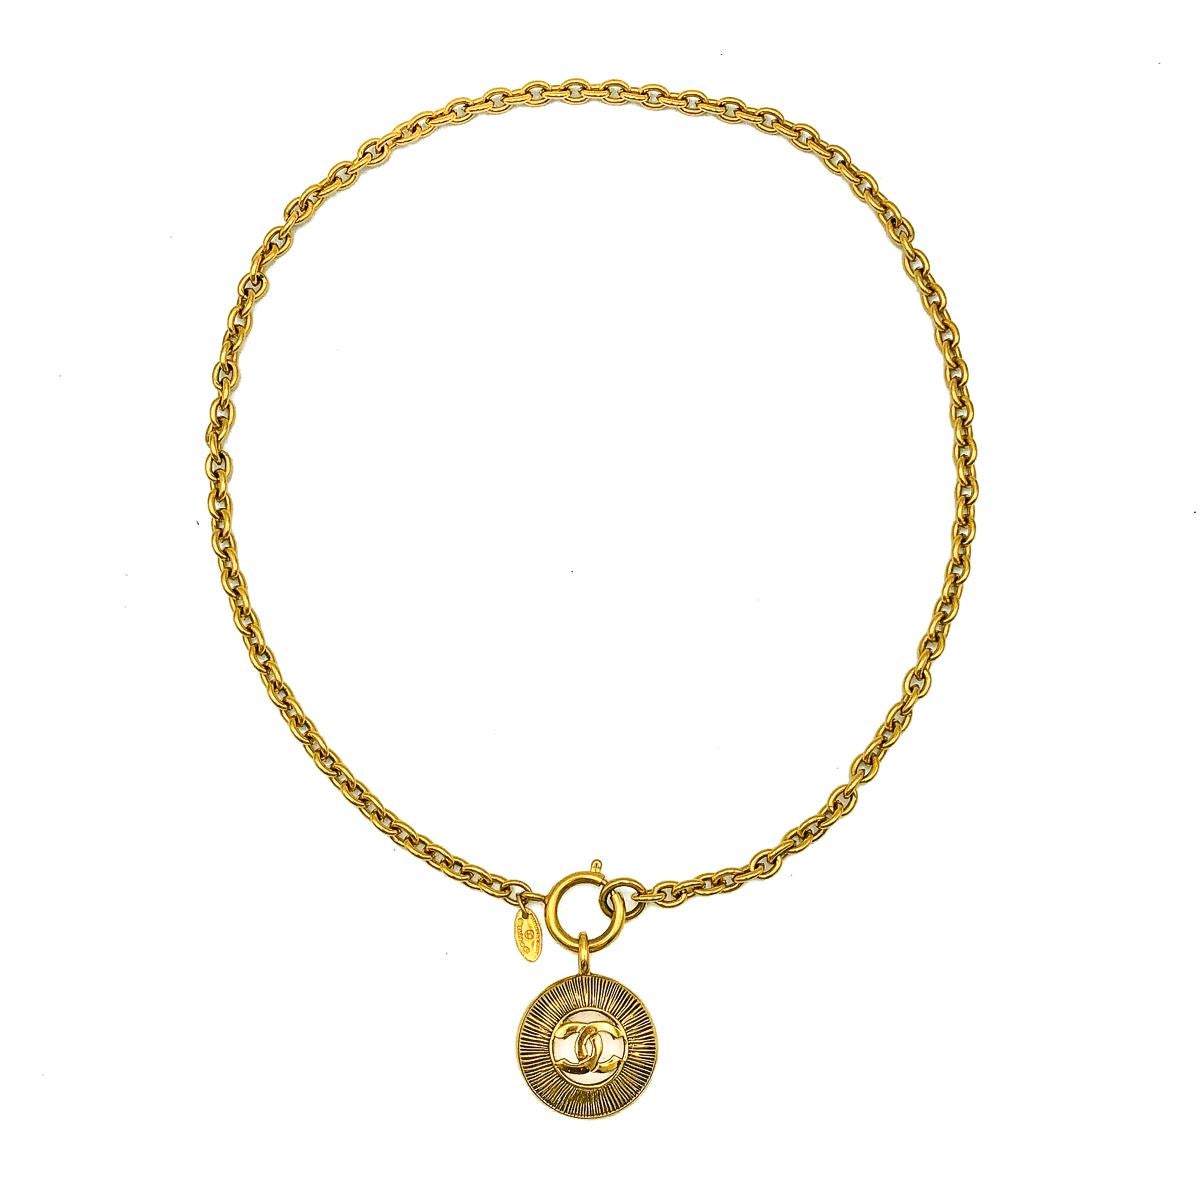 An utterly iconic Vintage Chanel Sunburst Necklace. Crafted in gold plated metal. In very good vintage condition. Signed. Approx. 58cms chain. A classically captivating piece from the House of Chanel that will prove eternally stylish. 

Established